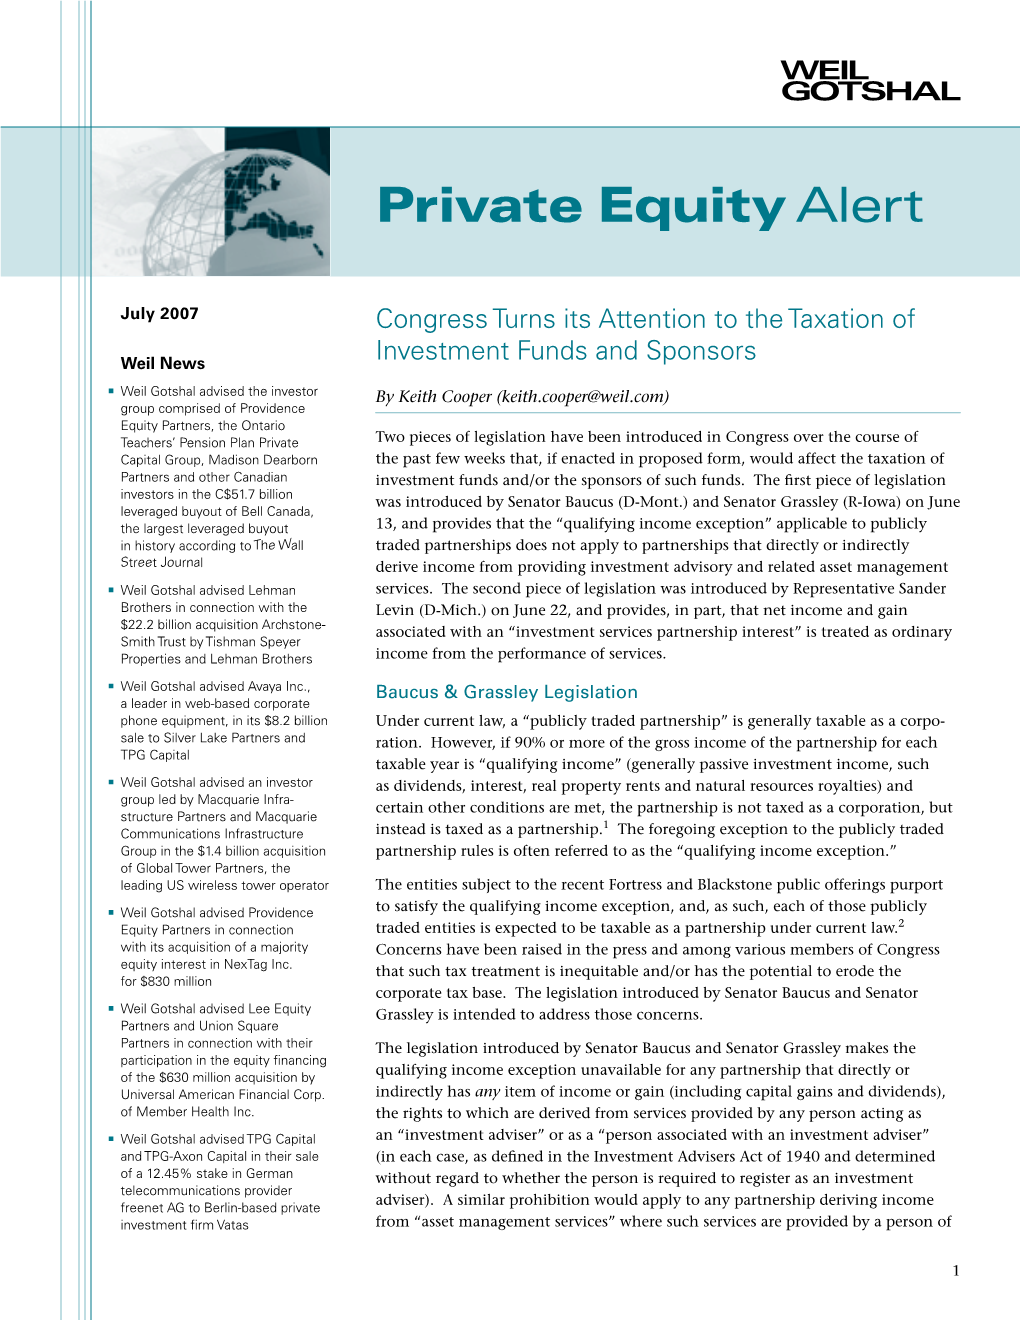 Private Equity Alert